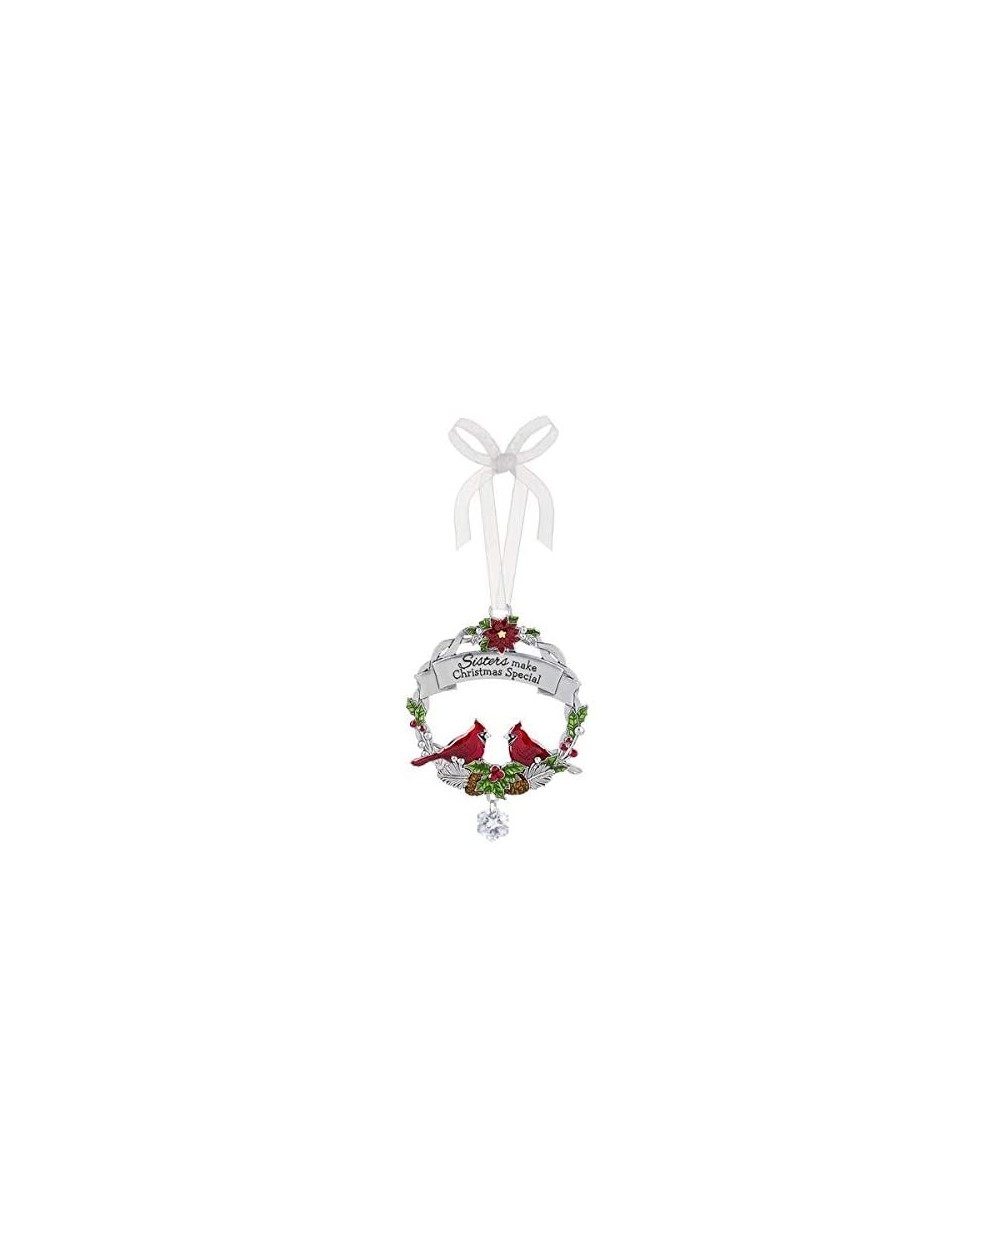 Ornaments Ornament - Sisters Make Christmas Special - CO18O3W69W7 $9.88